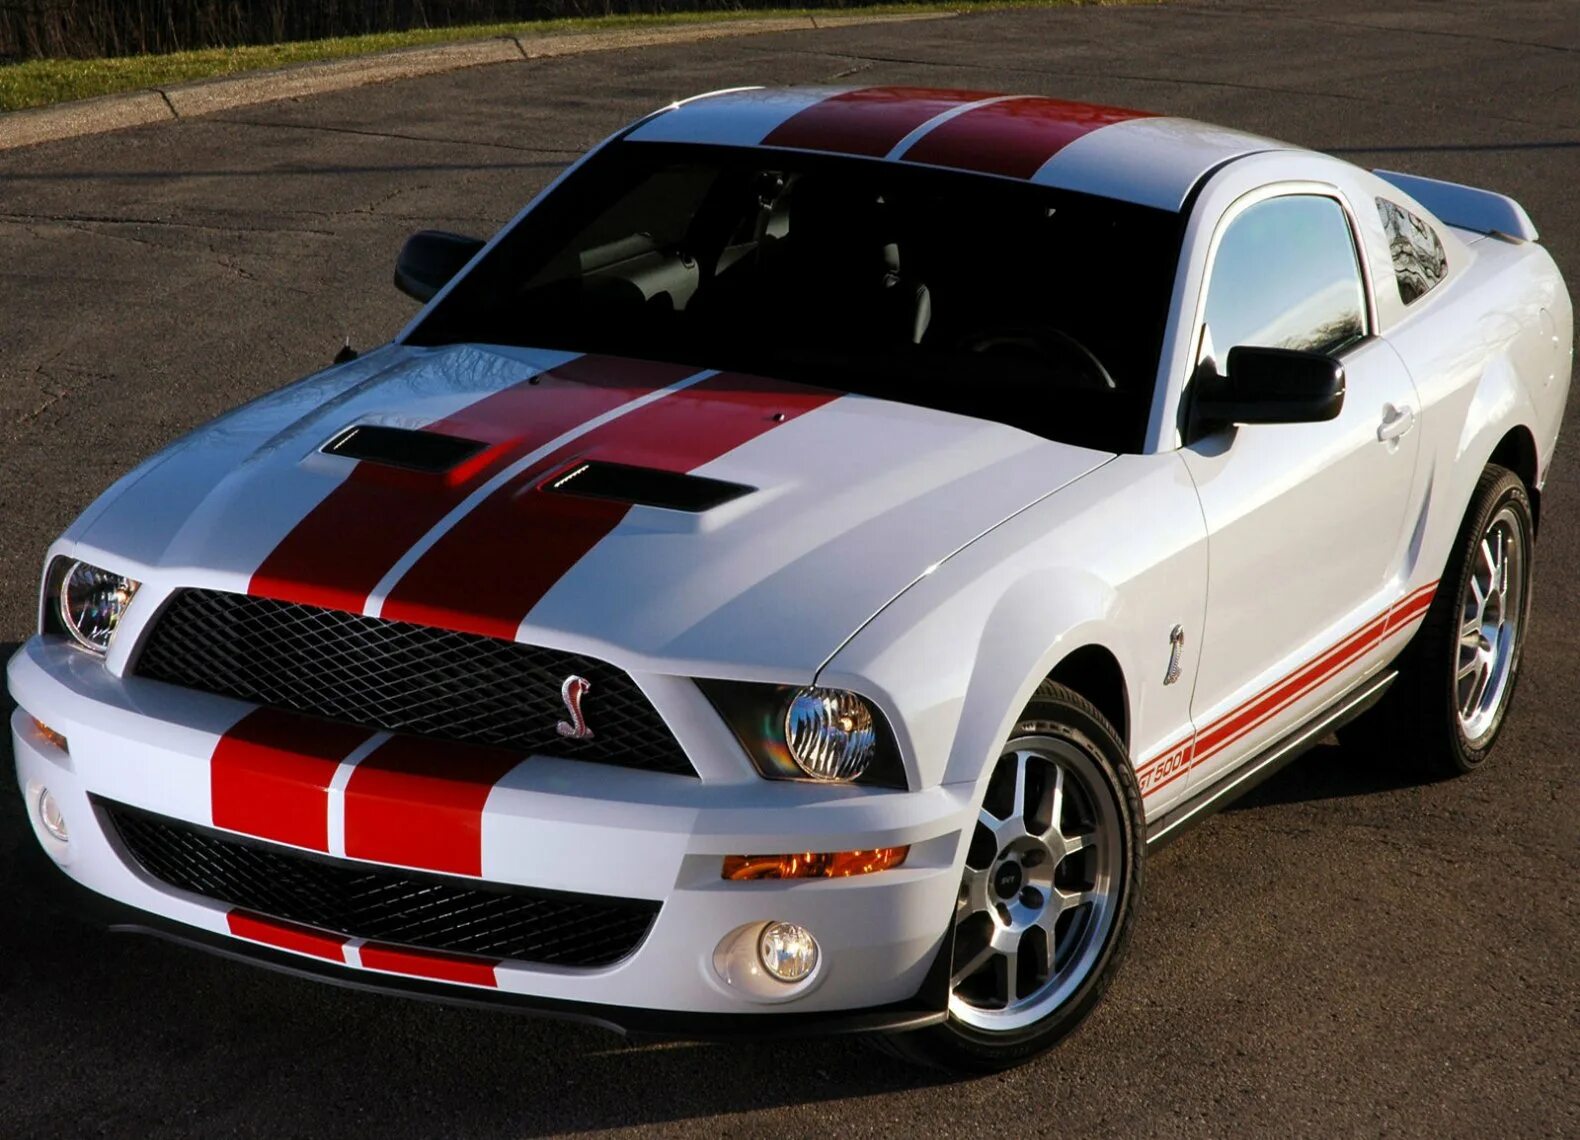 Форд Мустанг gt 500 Shelby. Ford Shelby gt500. Mustang Shelby gt500. Ford Mustang gt500. Mustang shelby gt